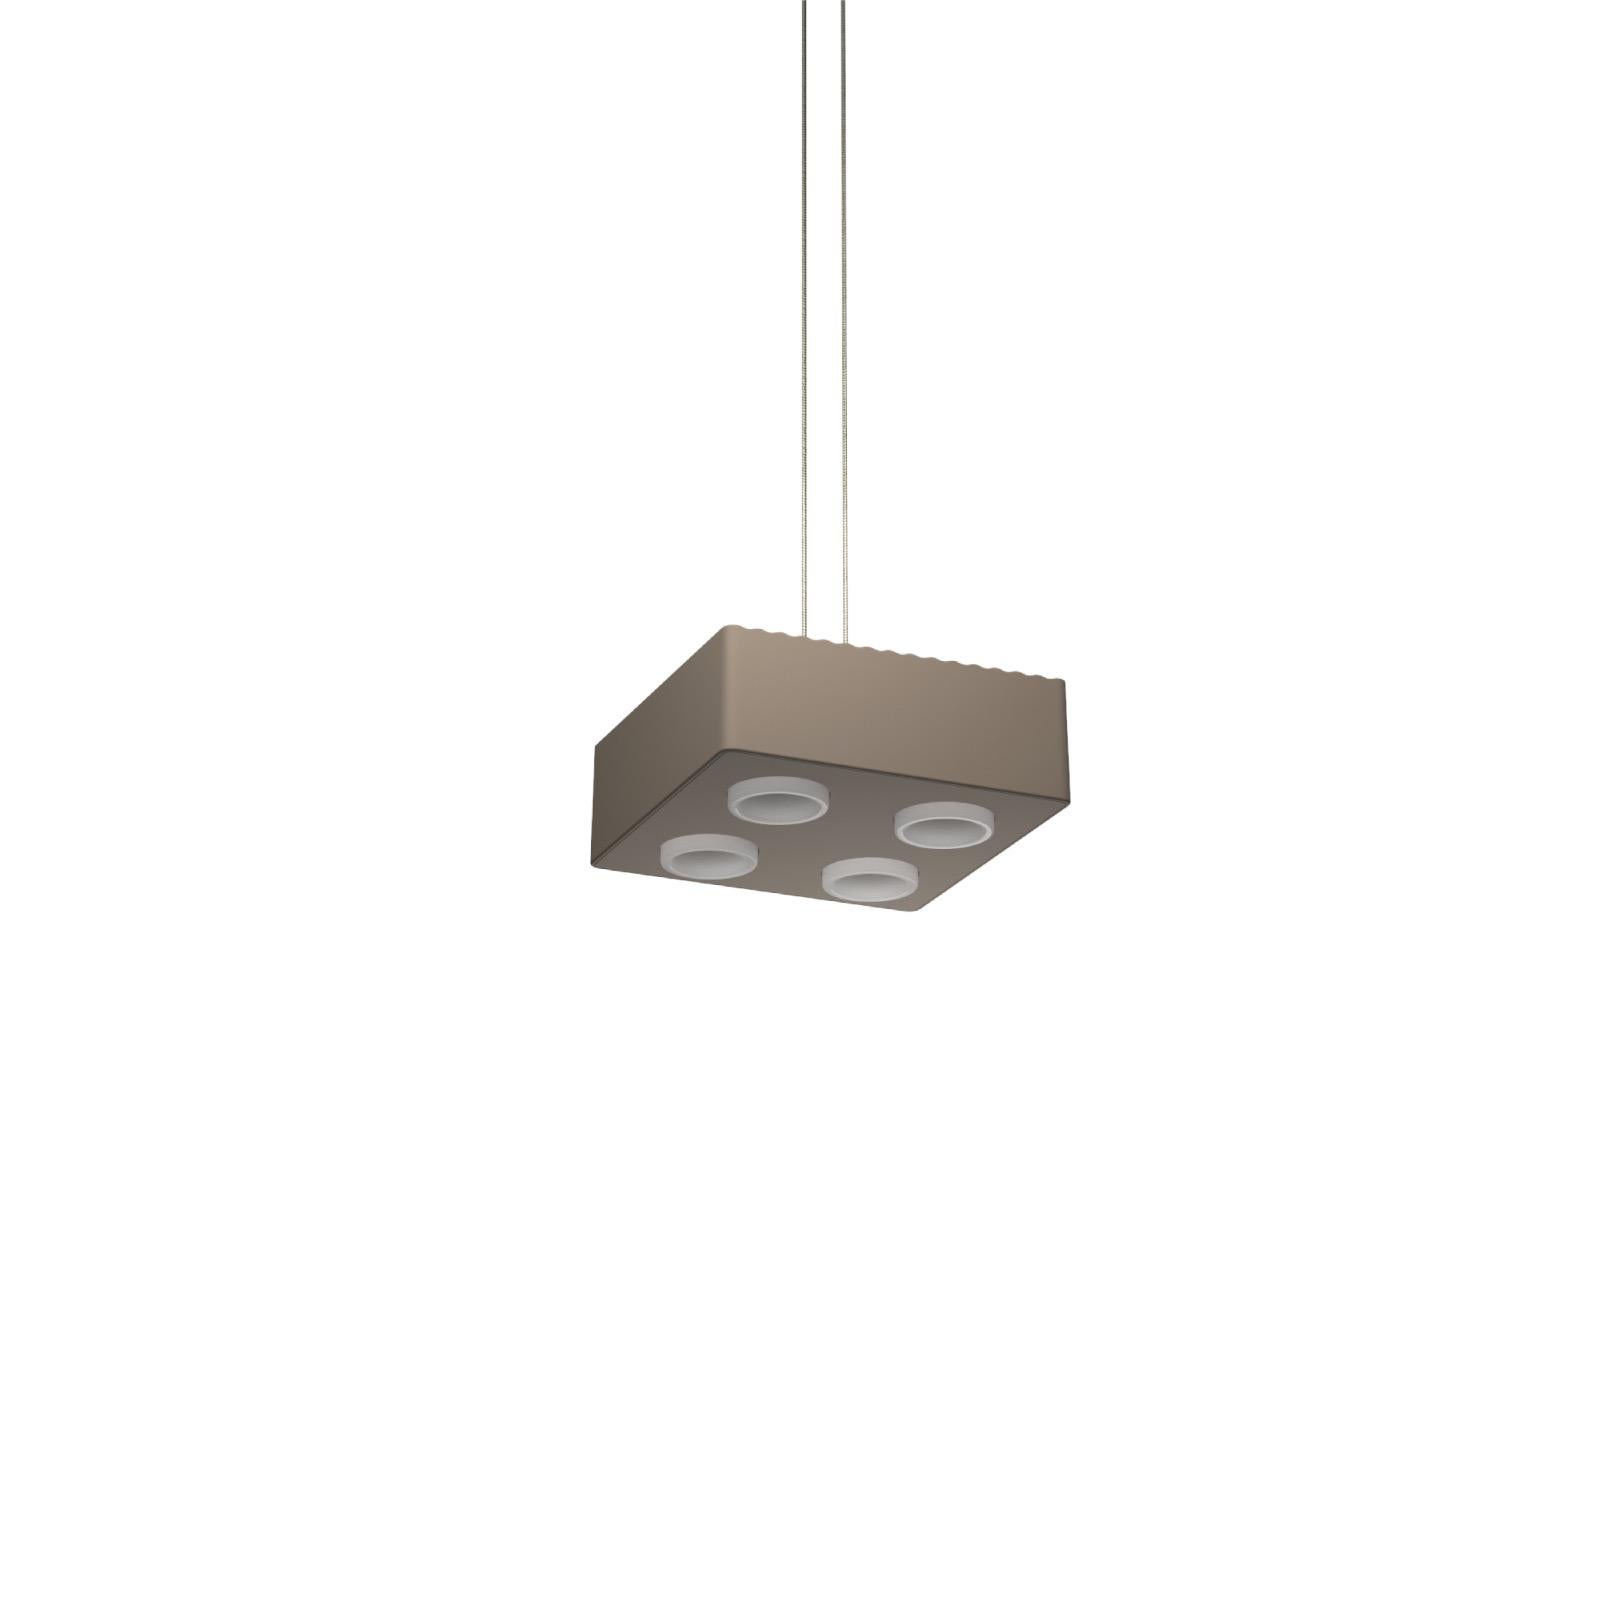 Korean Contemporary Pendant Lamp 'Domino' by Sylvain Willenz x AGO, Mud Gray  For Sale